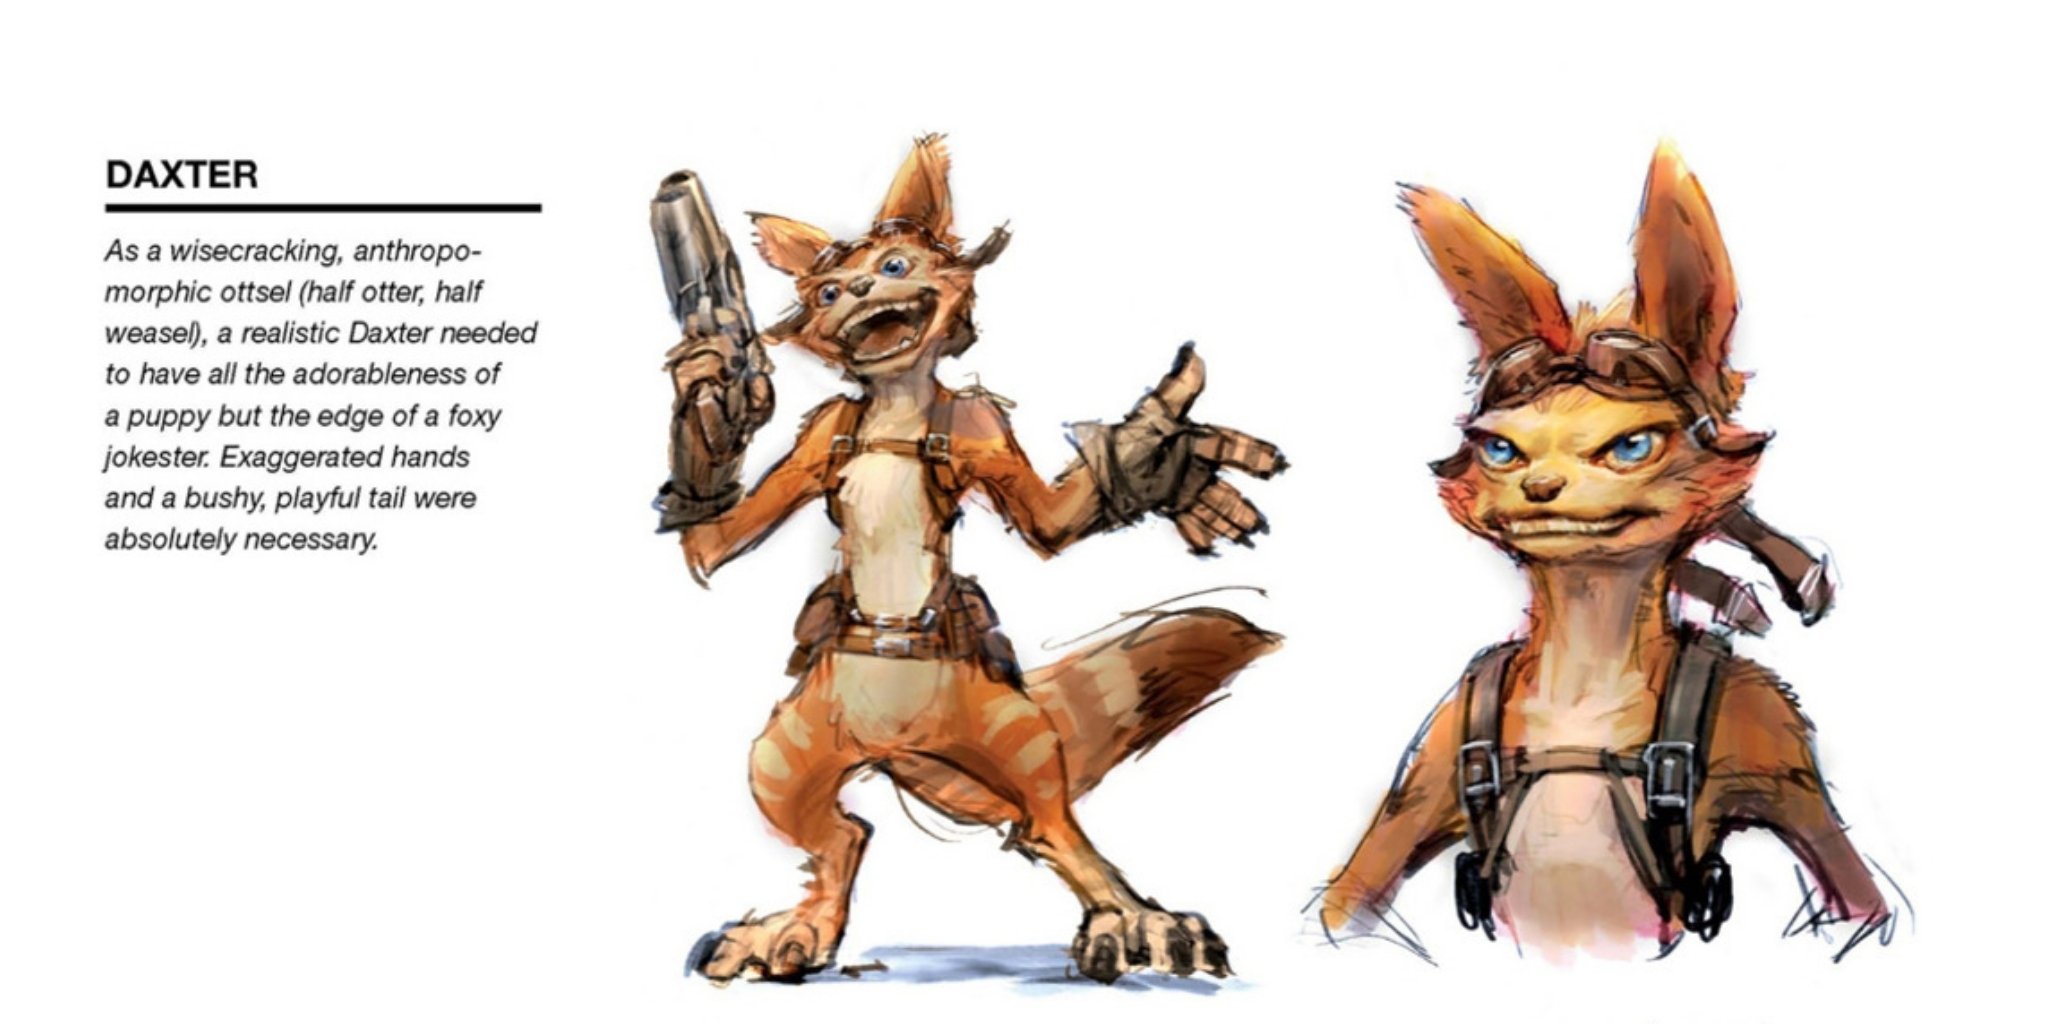 Jak and Daxter | 𝗘𝗖𝗢-𝗠𝗠𝗨𝗡𝗜𝗧𝗬 on Twitter: "I may be in minority here, but I love this official Jak 4 concept art of Daxter. https://t.co/Xx7bRhg80P" / Twitter